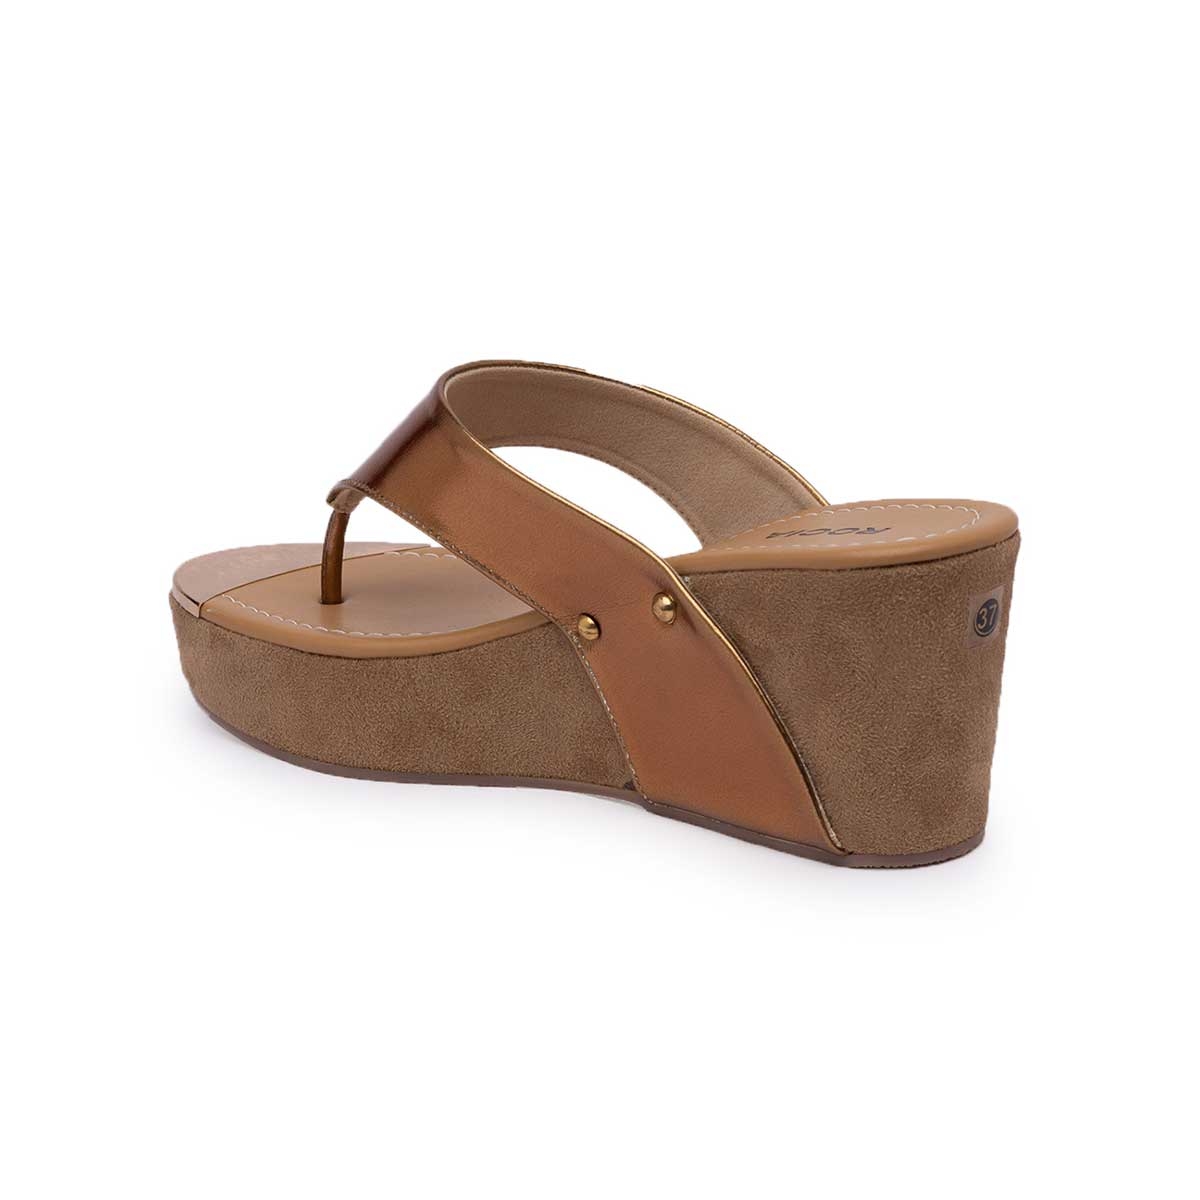 Buy Tommy Hilfiger Open Toe High Wedge Sandals - NNNOW.com